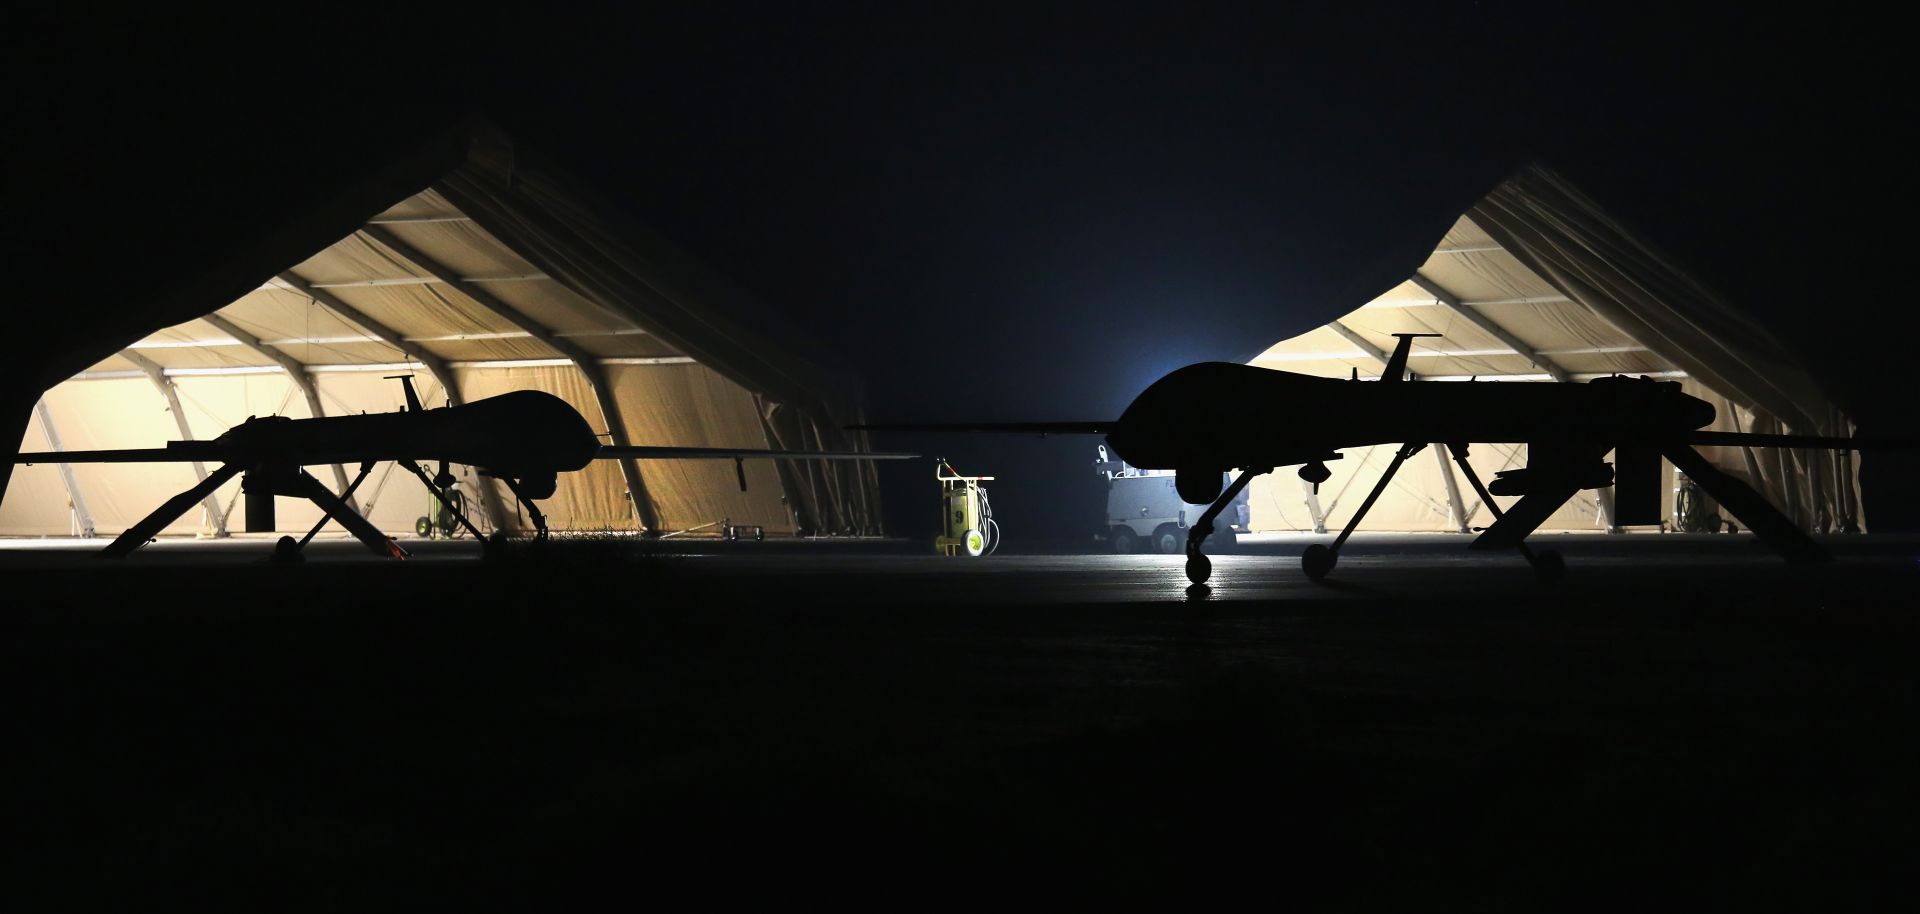 A U.S. Air Force MQ-1B Predator unmanned aerial vehicle returns from a mission to an air base in the Persian Gulf region.